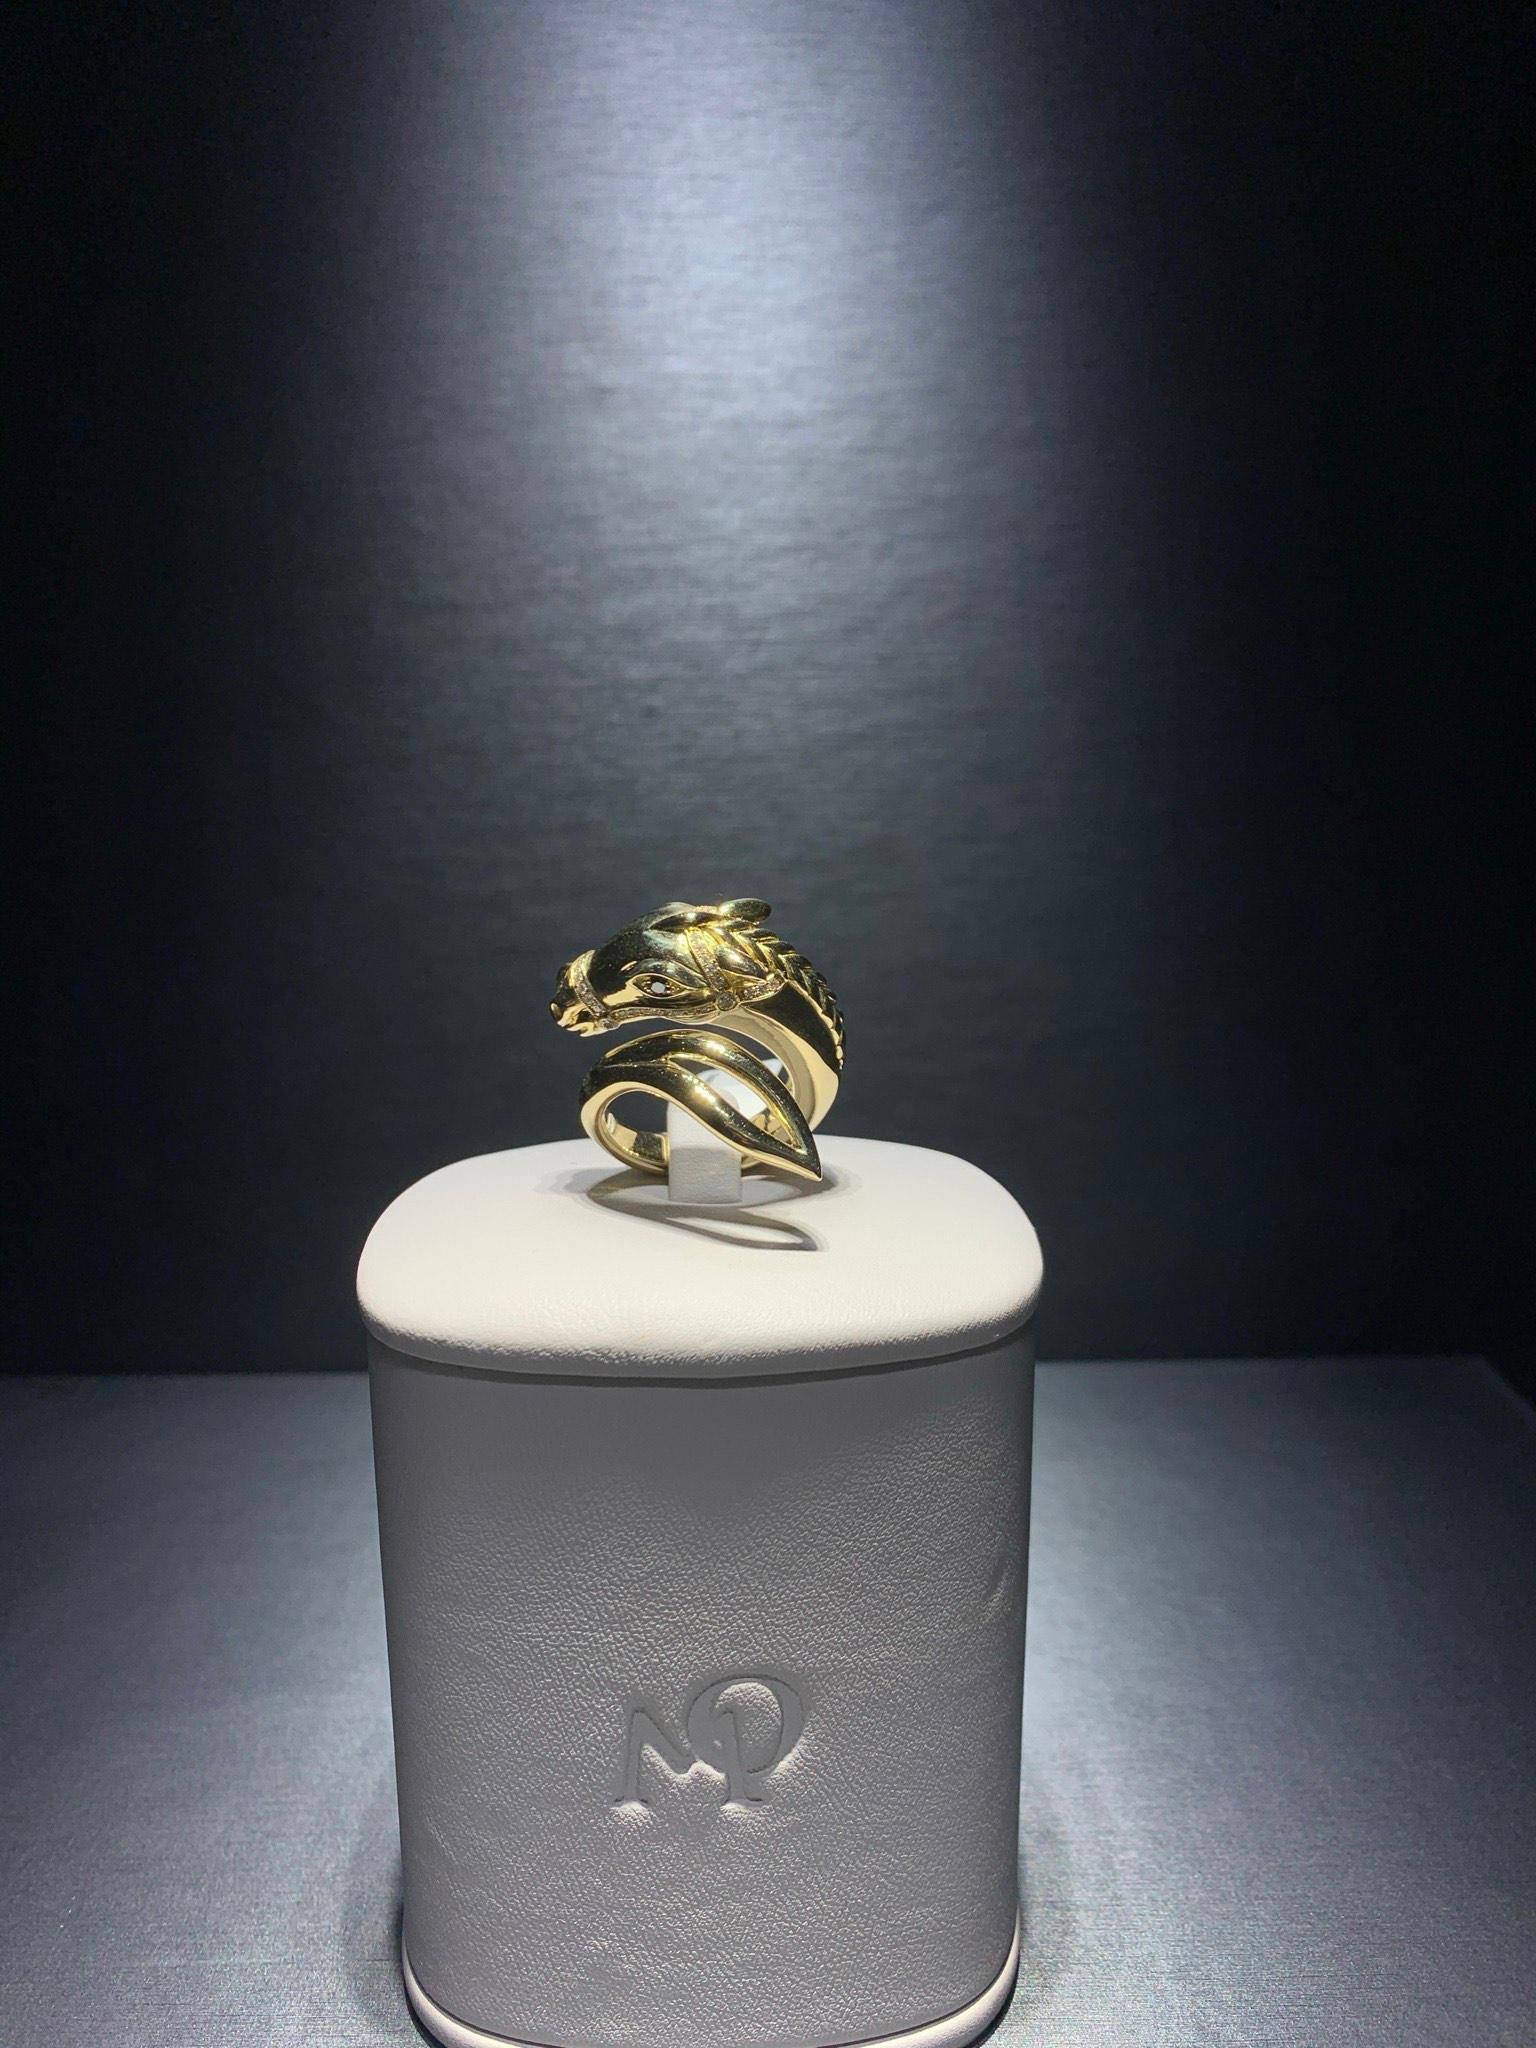 18 Karat yellow gold 'Another World' limited edition Horse ring created by Monan with 0.21 carats of white round brilliant cut diamonds, E-G colour and VS-VVS clarity and 0.06 carat of garnet.
Finger size 52 (Europe) = L 1/2 (UK) = 6 (US)
‘Another